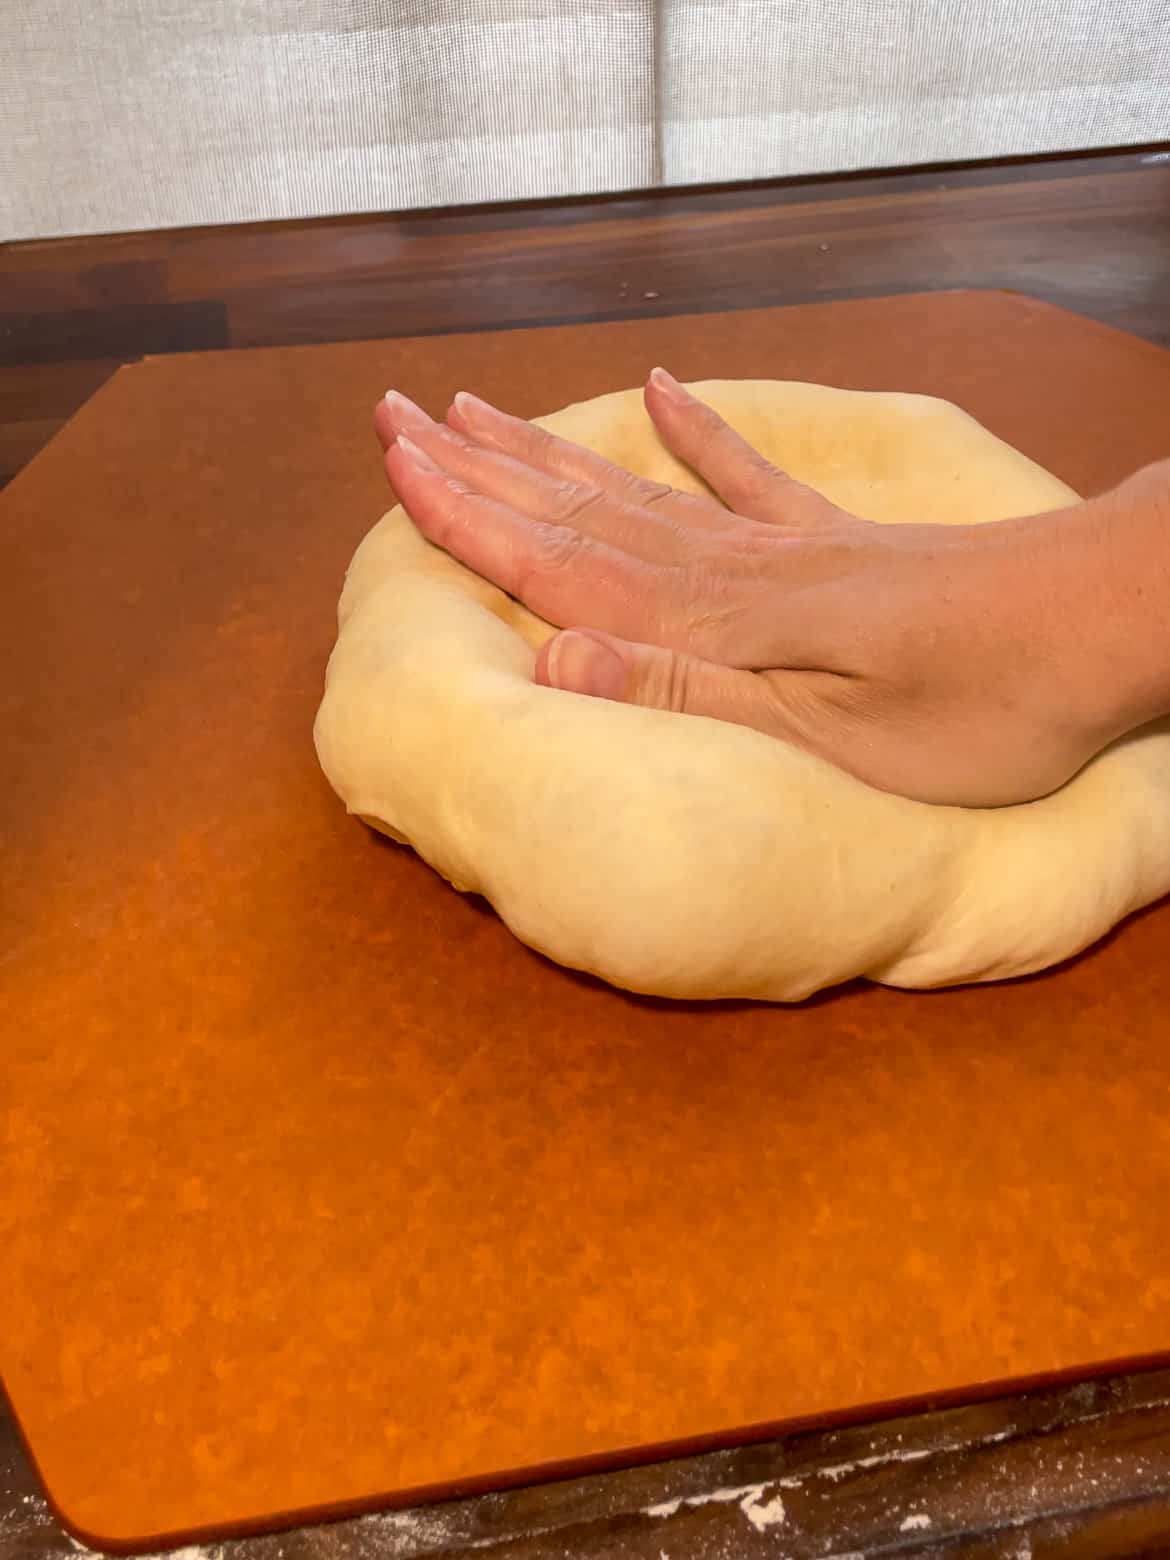 Shaping homemade pizza dough on a pizza peel using your hands.